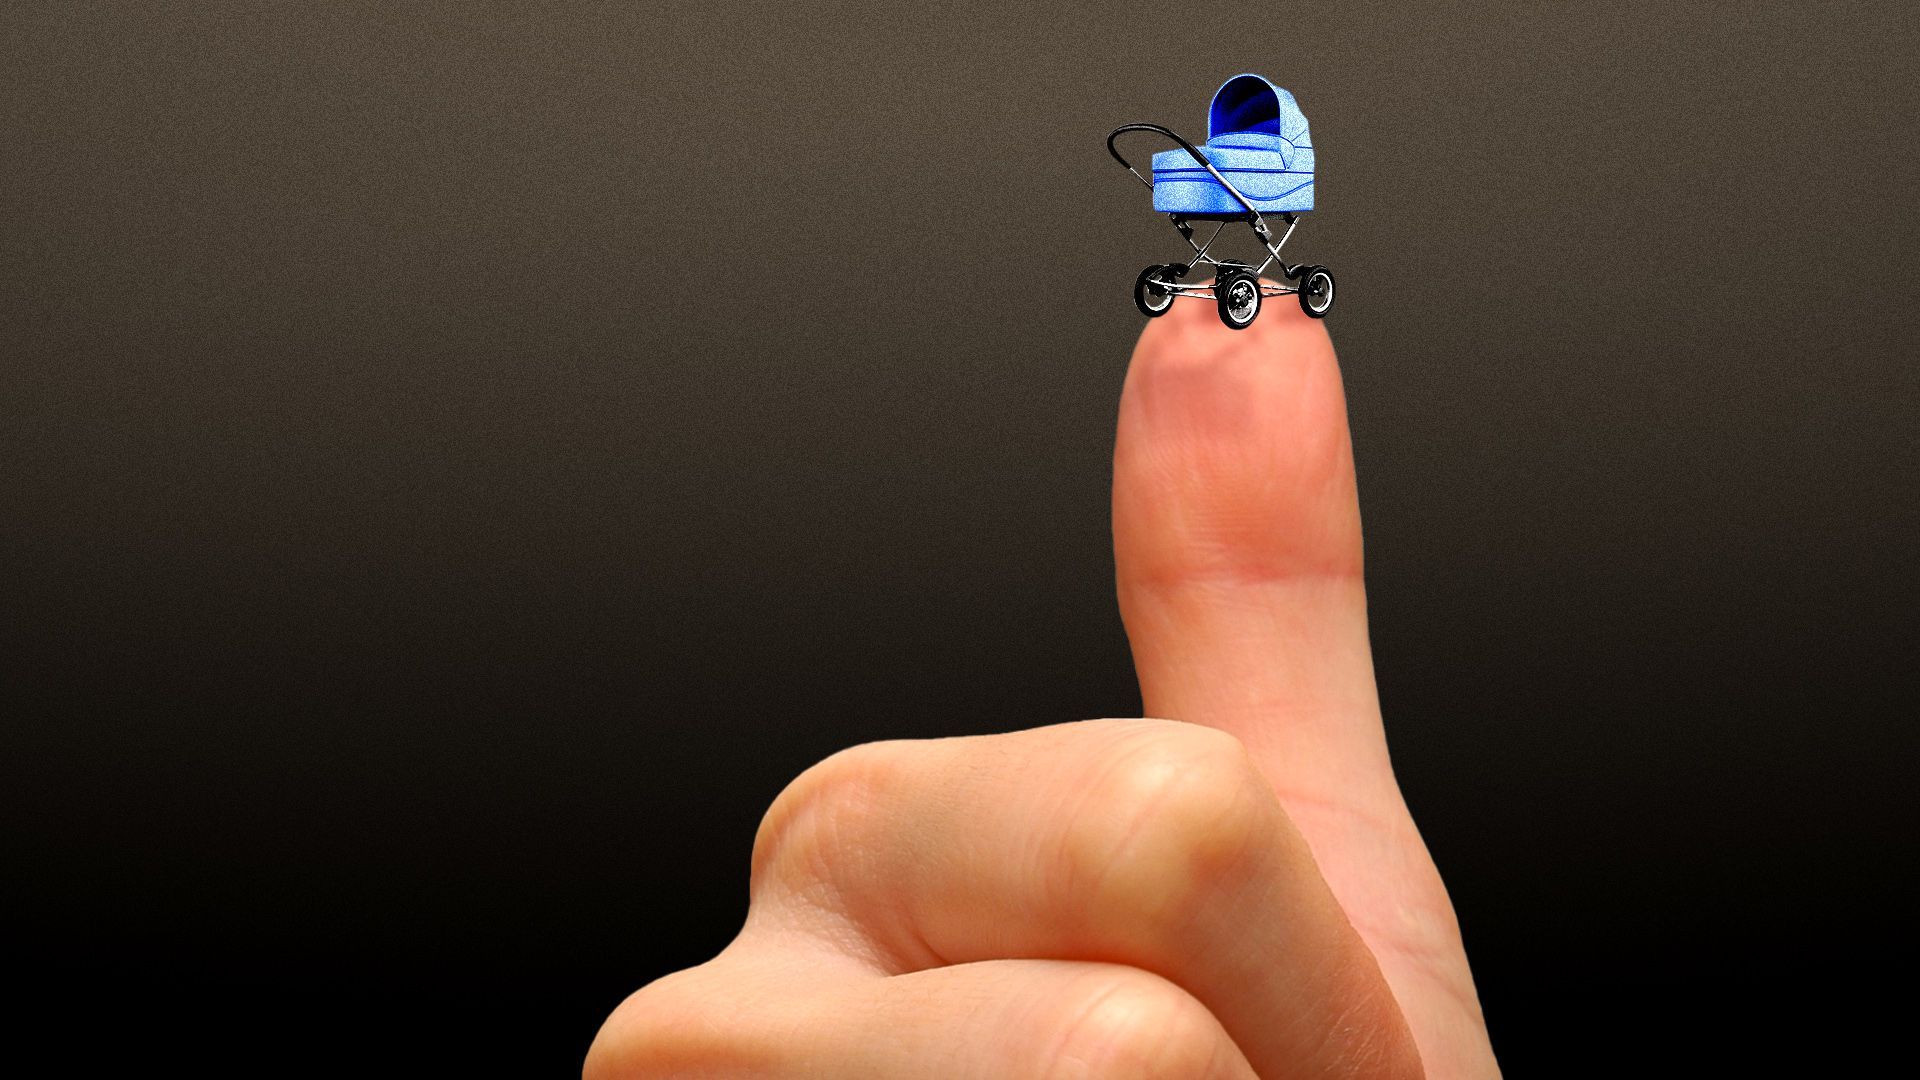 Illustration of a hand making a thumbs up with a tiny baby carriage balanced on top